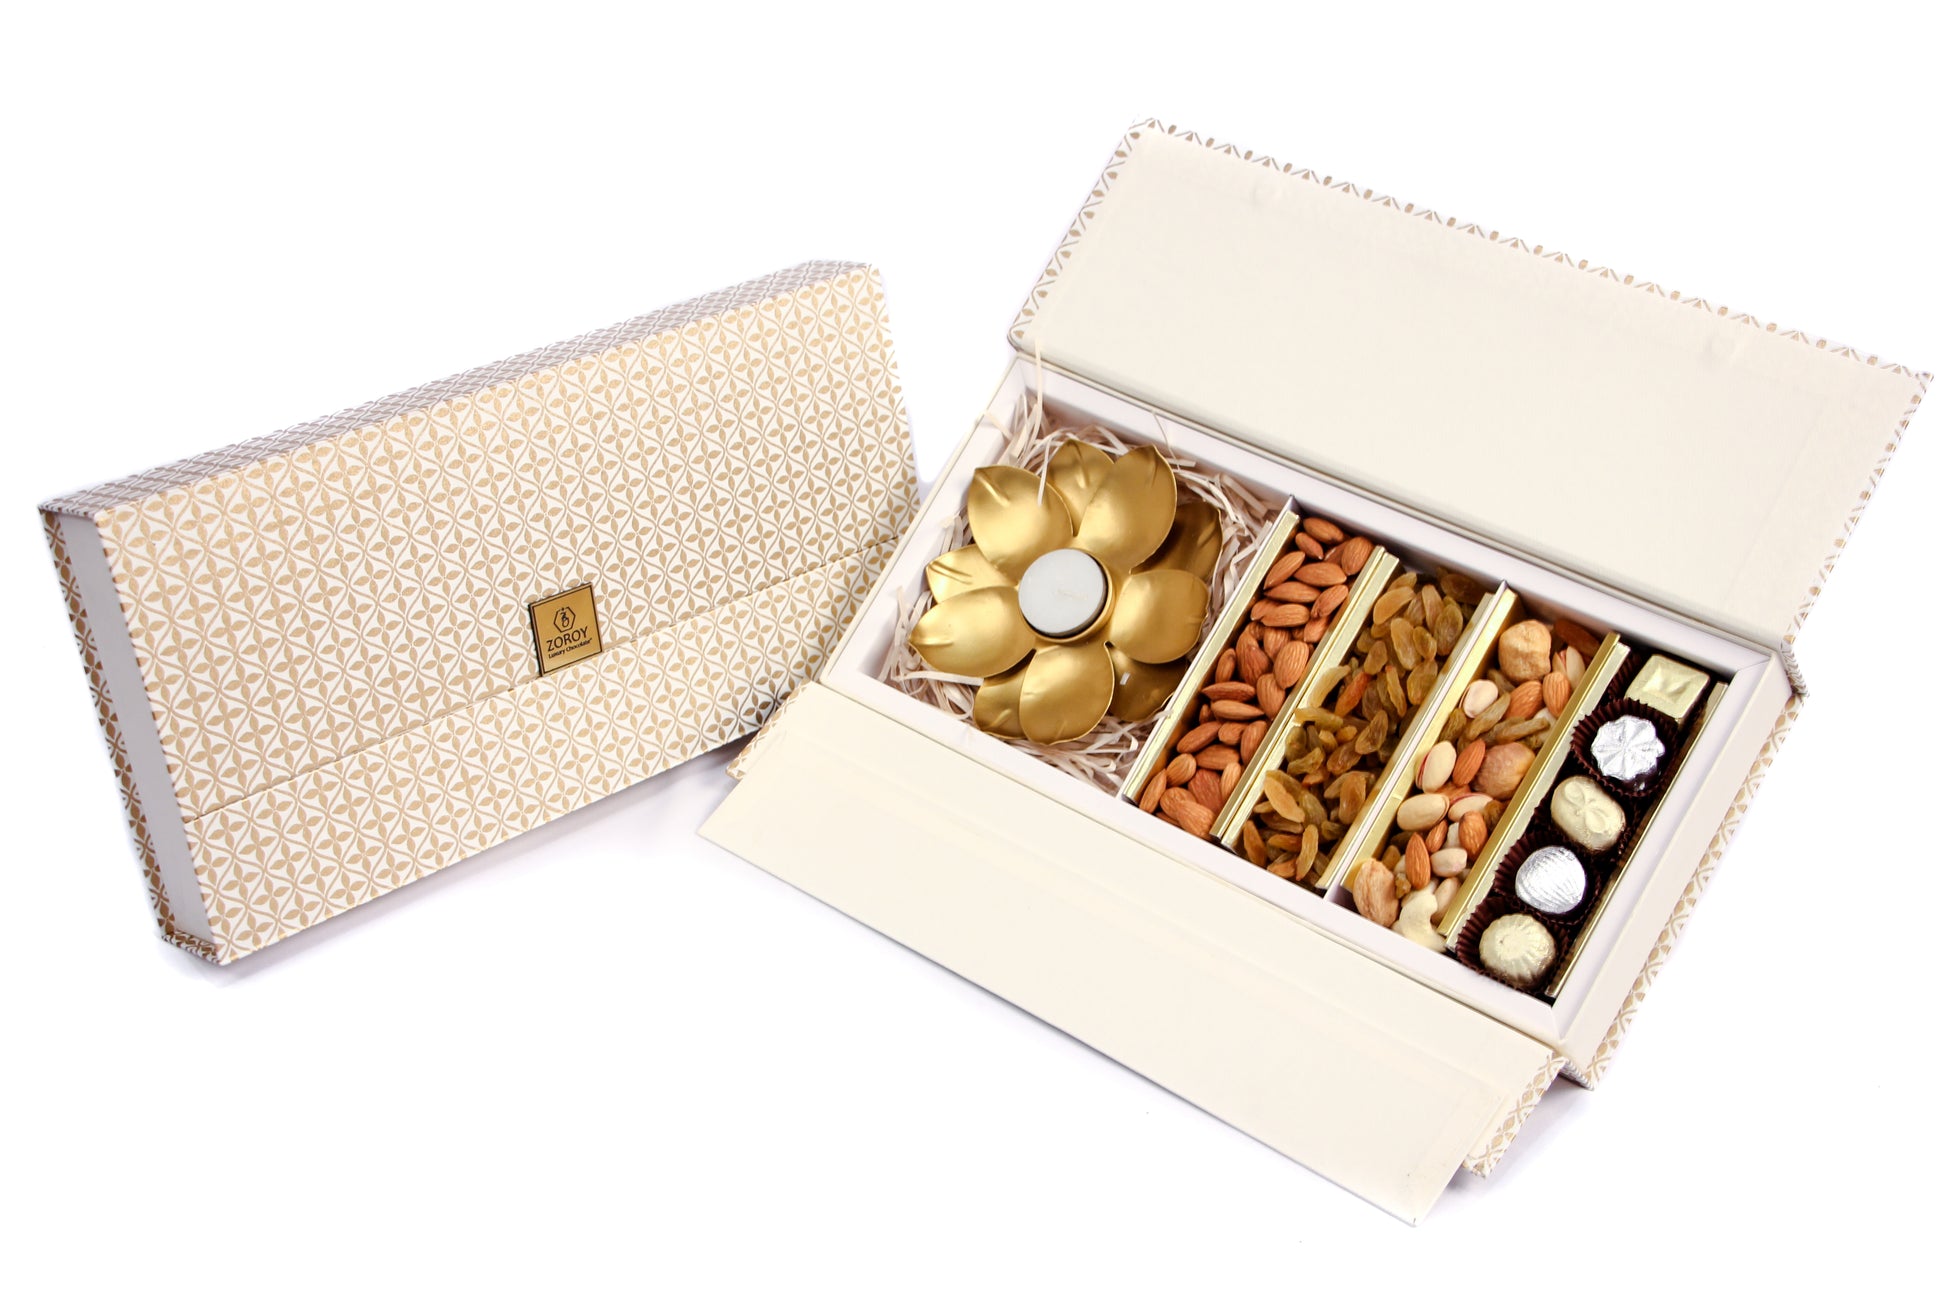 The Festive hamper combo box of chocolates, t lite holder and dry fruits